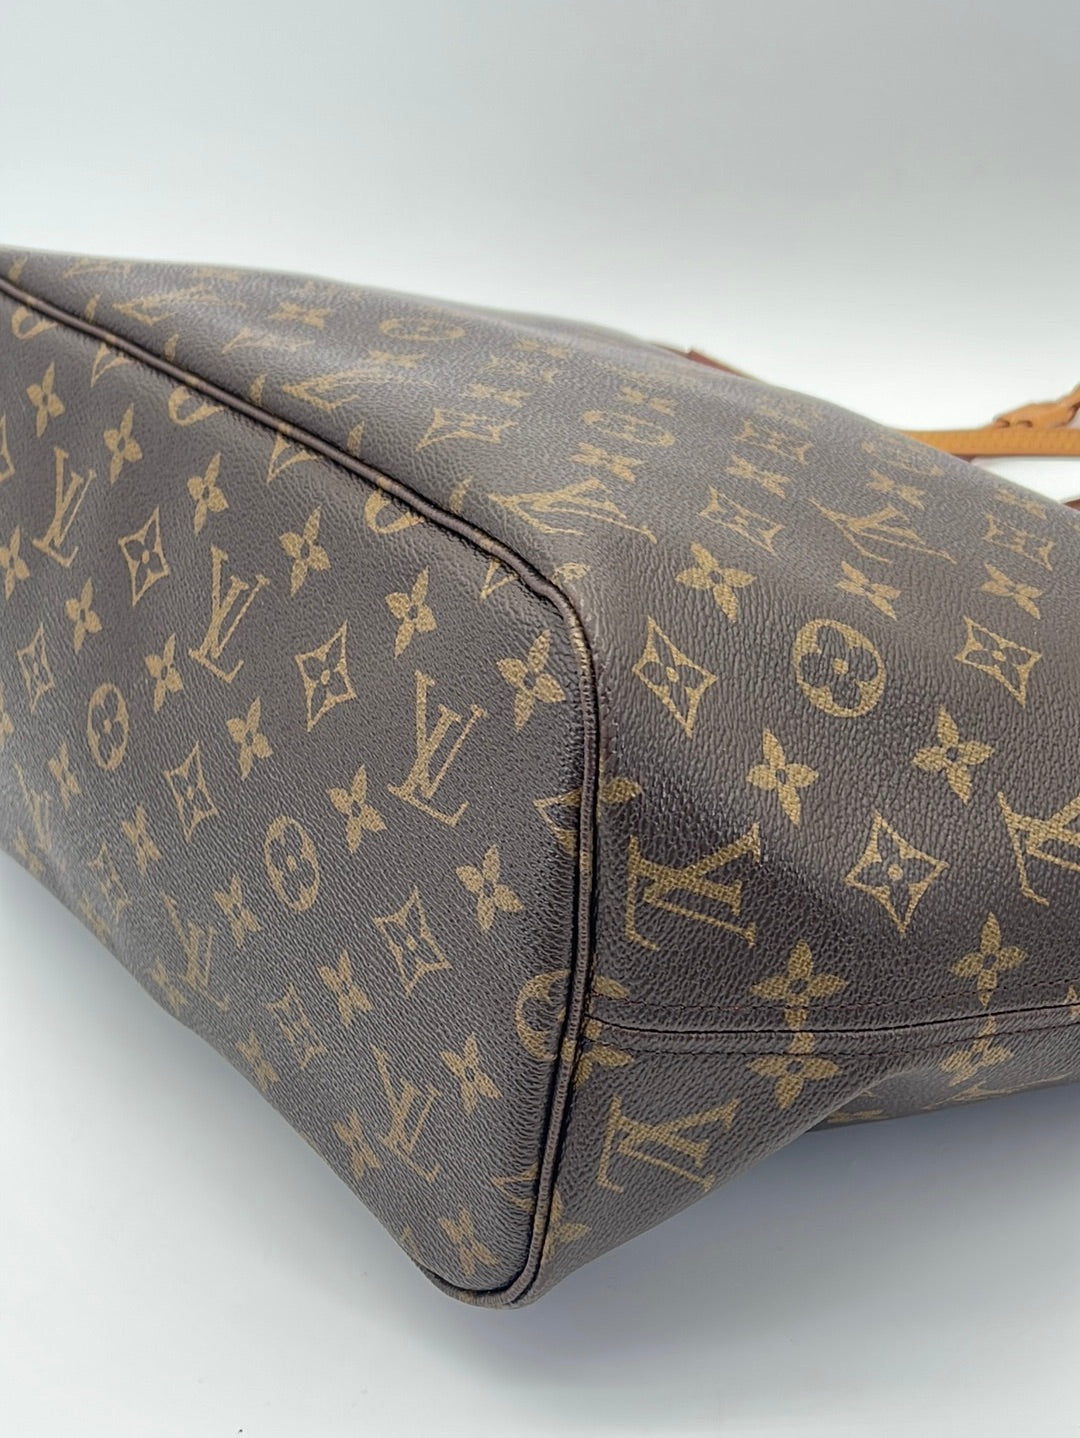 Louis Vuitton-Monogram Ikat Neverfull MM Tote - Couture Traders